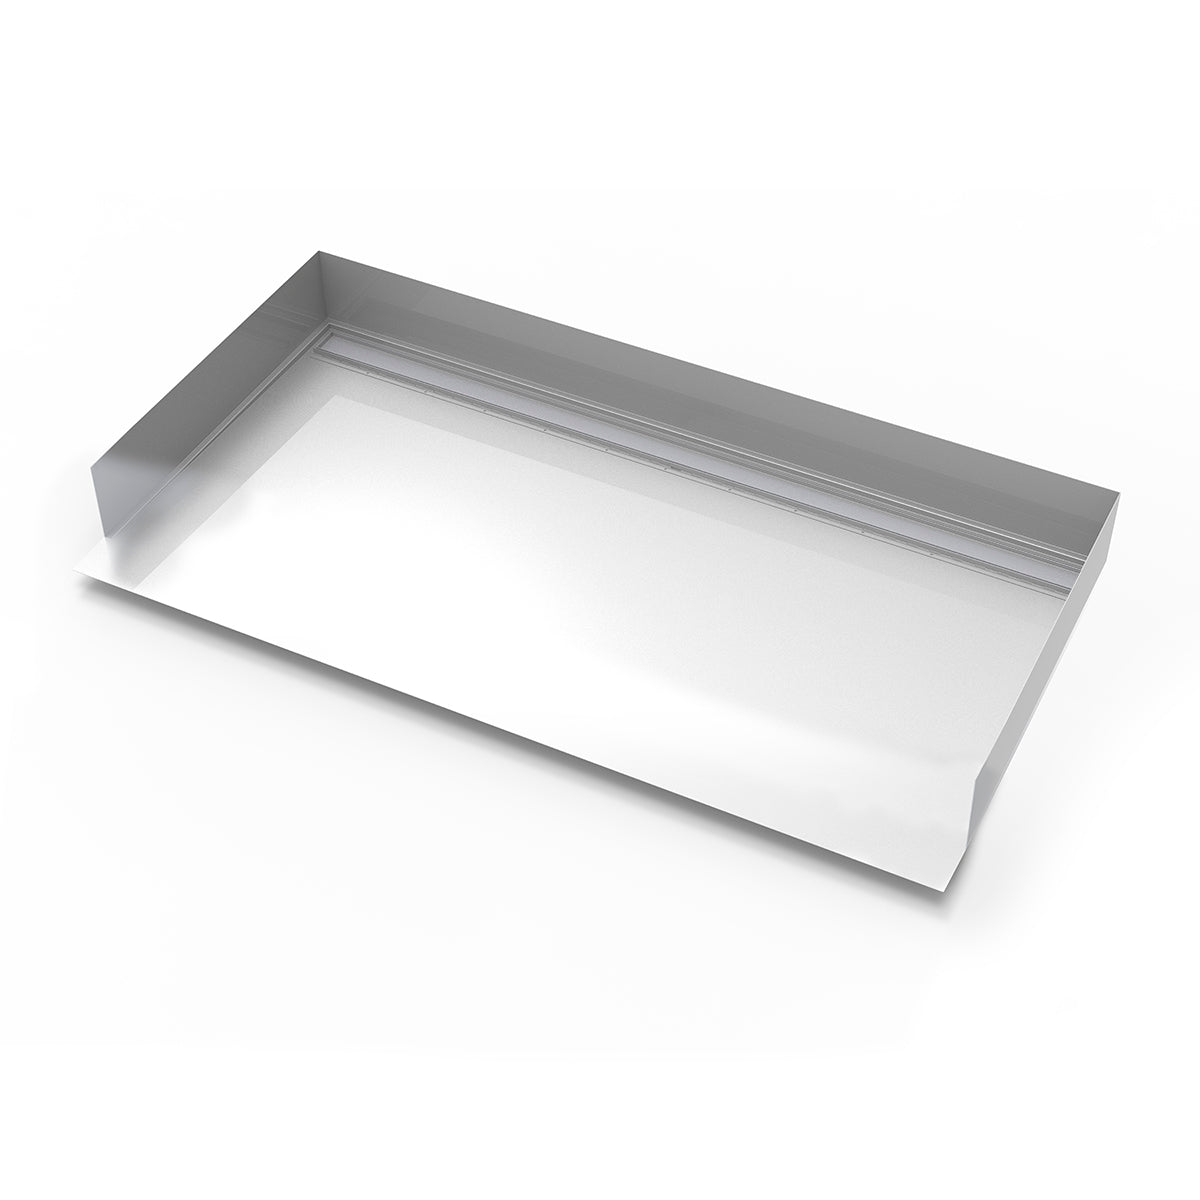 Infinity Drain 30"x 60" Curbless Stainless Steel Shower Base with Back Wall Tile Insert Linear Drain location